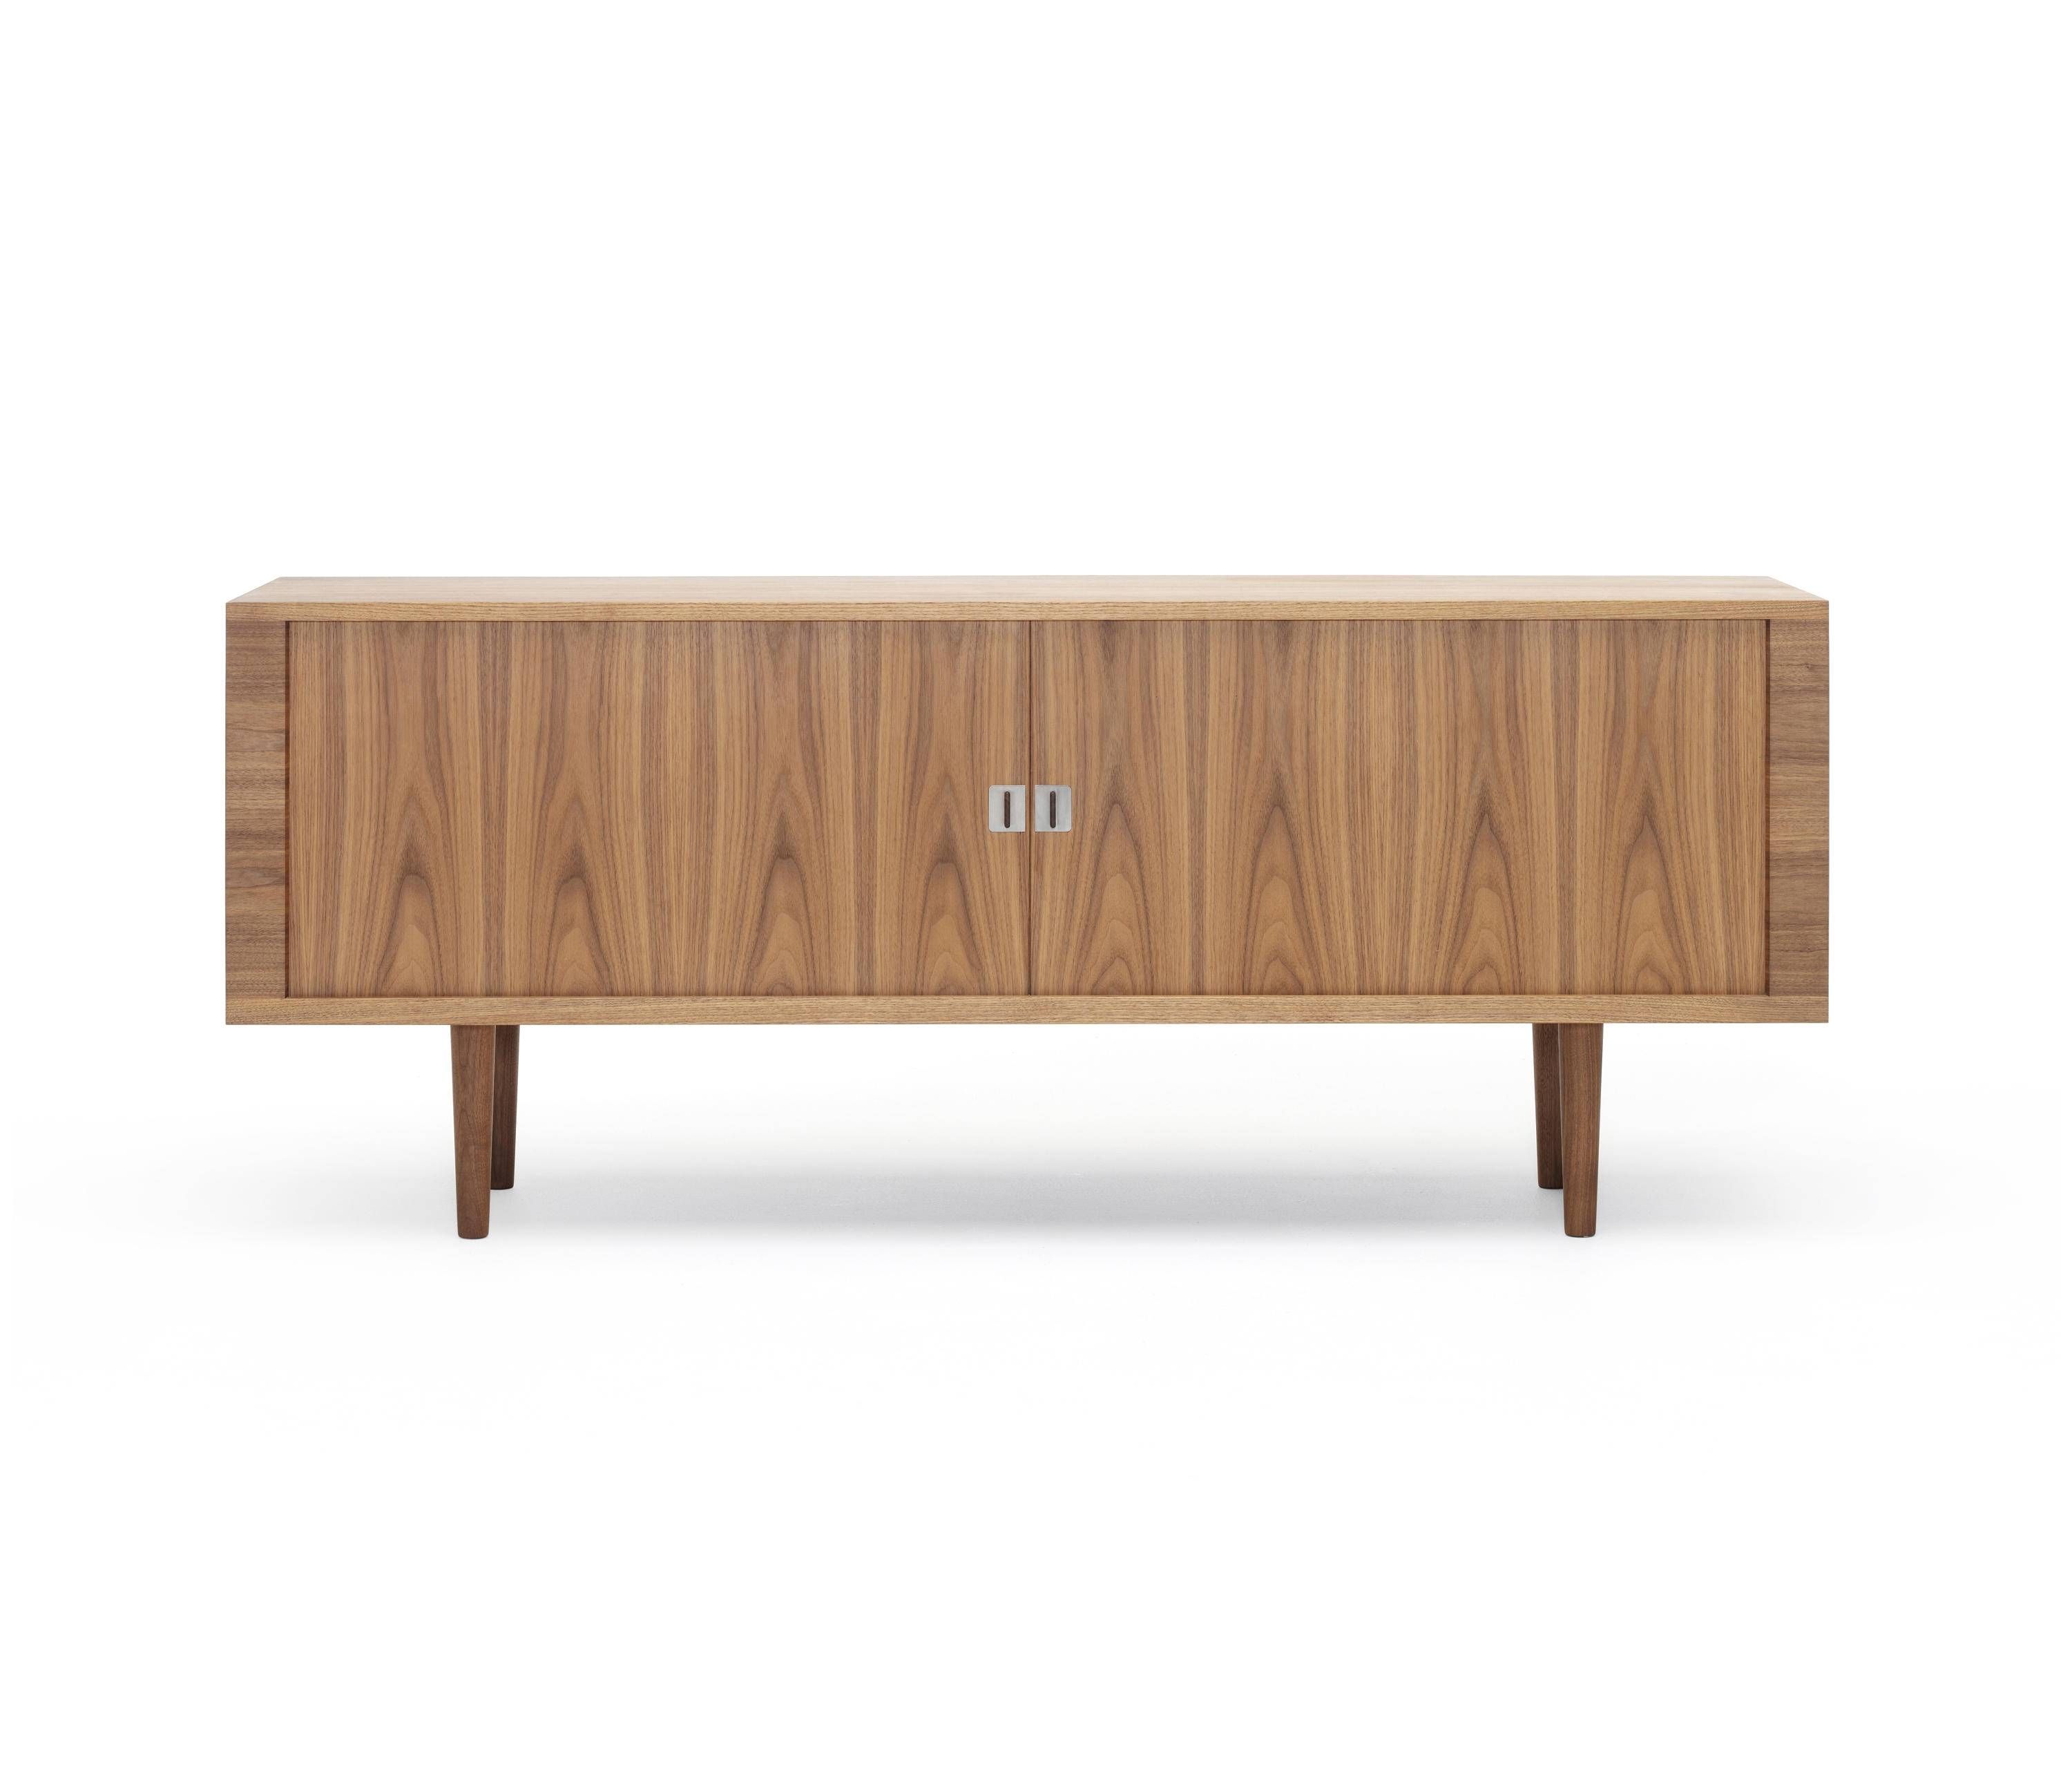 Ch825 Credenza – Sideboards From Carl Hansen & Søn | Architonic Intended For Most Recent Credenza Sideboards (View 11 of 15)